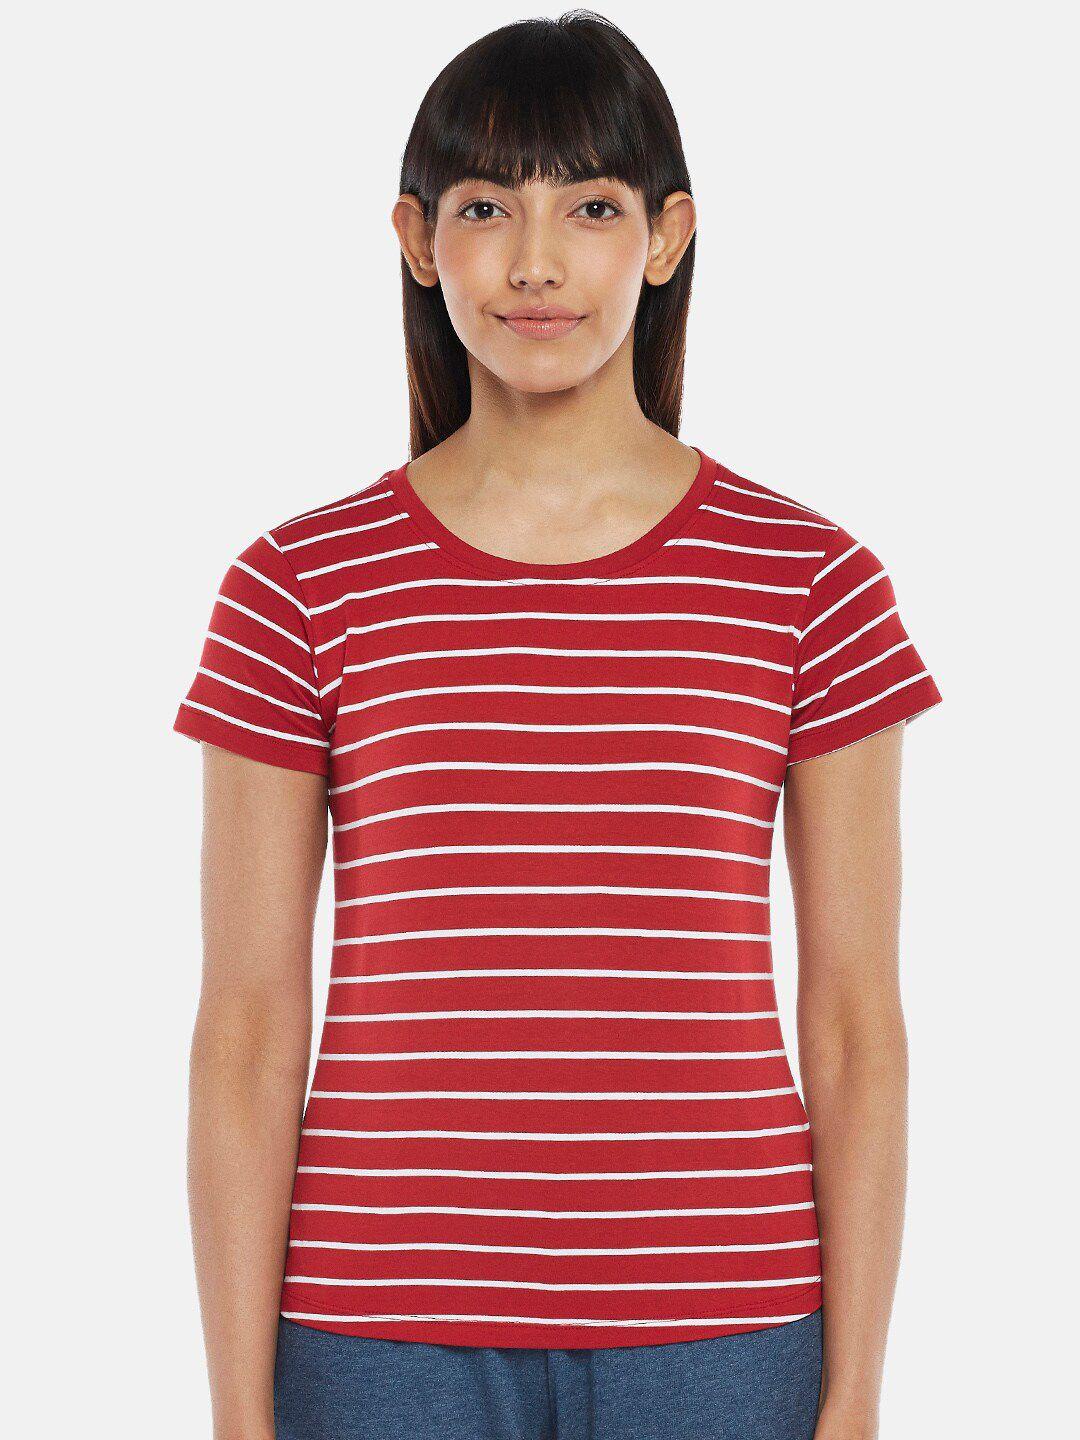 dreamz by pantaloons red striped top